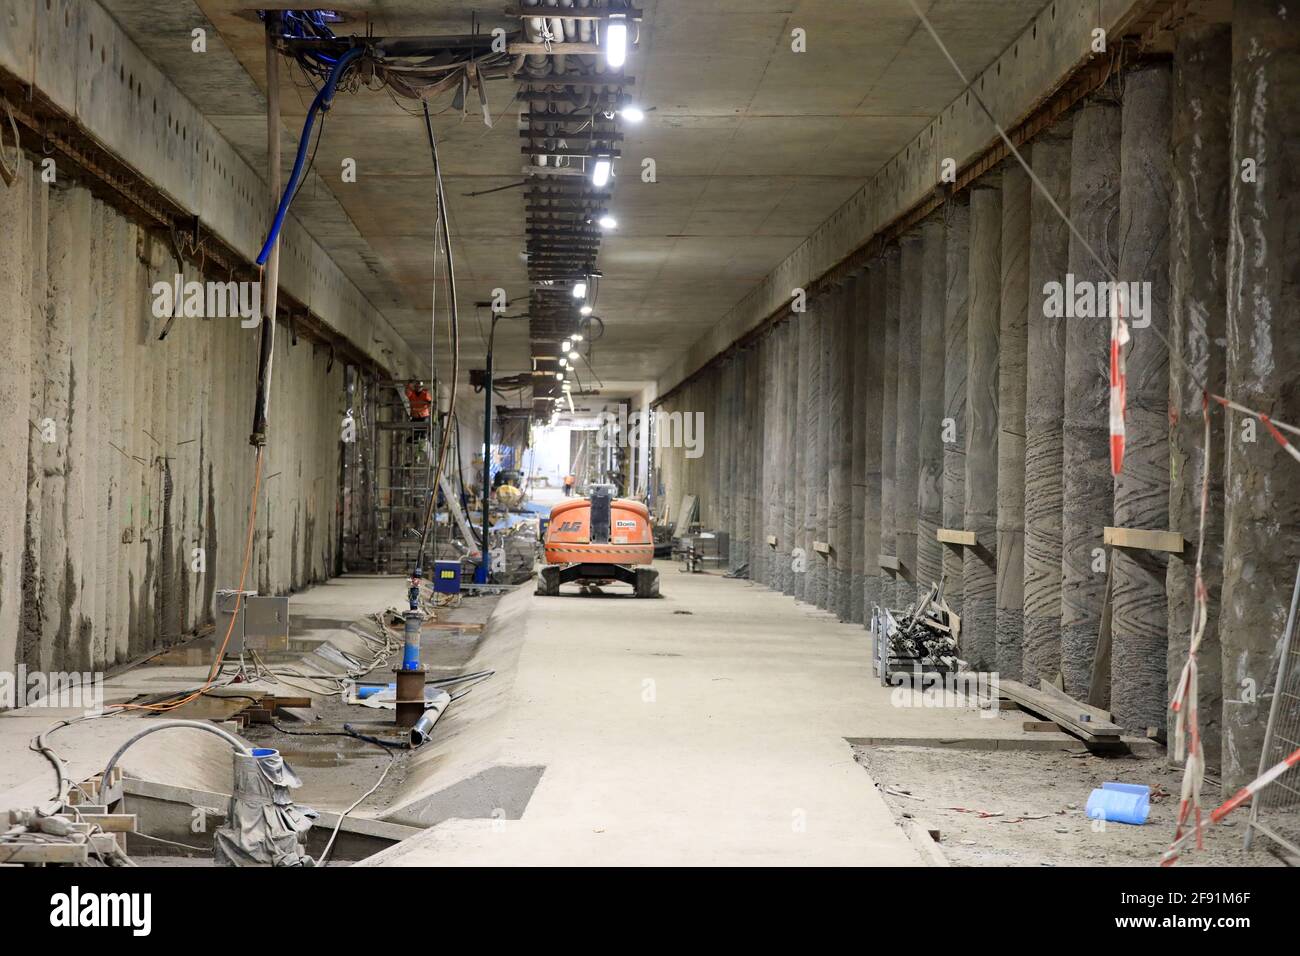 14 April 2021, Saxony-Anhalt, Magdeburg: View into the construction site of Magdeburg's Citytunnel. The construction, which was originally scheduled for completion in October 2019, could now be finished by the end of 2022, according to the state capital. According to current projections, total costs of around 198 million euros are foreseeable for the major construction project with tunnel, railway bridges, supply and disposal lines and tram tracks. The city would bear around 80 million euros of this. Most recently, the total costs were stated at around 139 million euros, originally it was 40 m Stock Photo